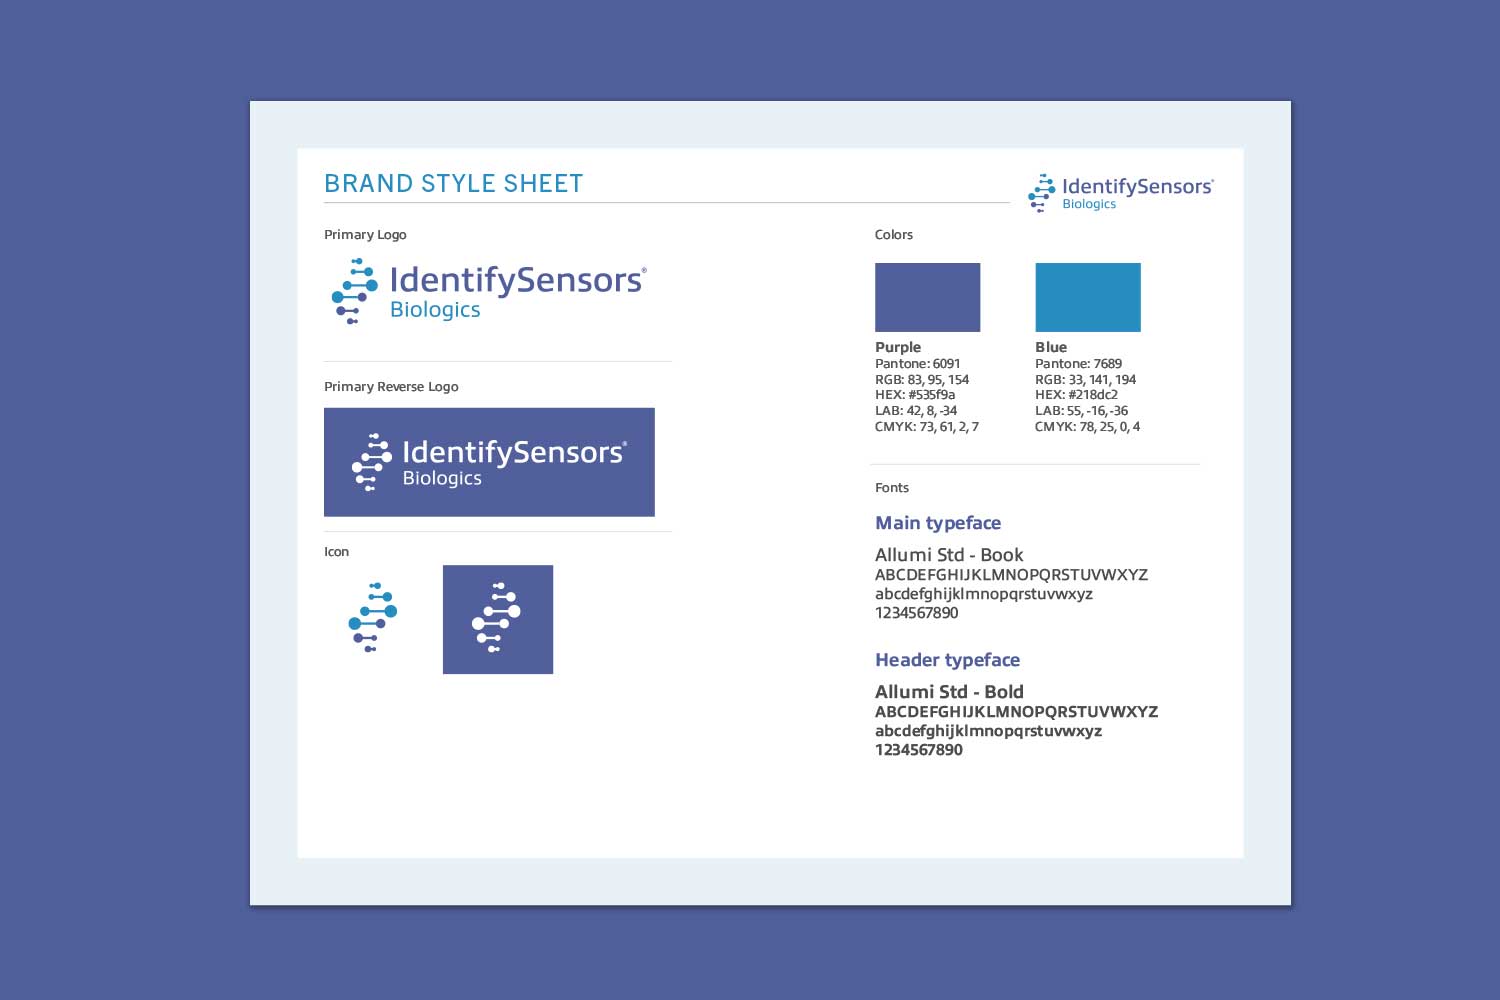 The brand guidelines that Acclaim created for IdentifySensors Biologics.